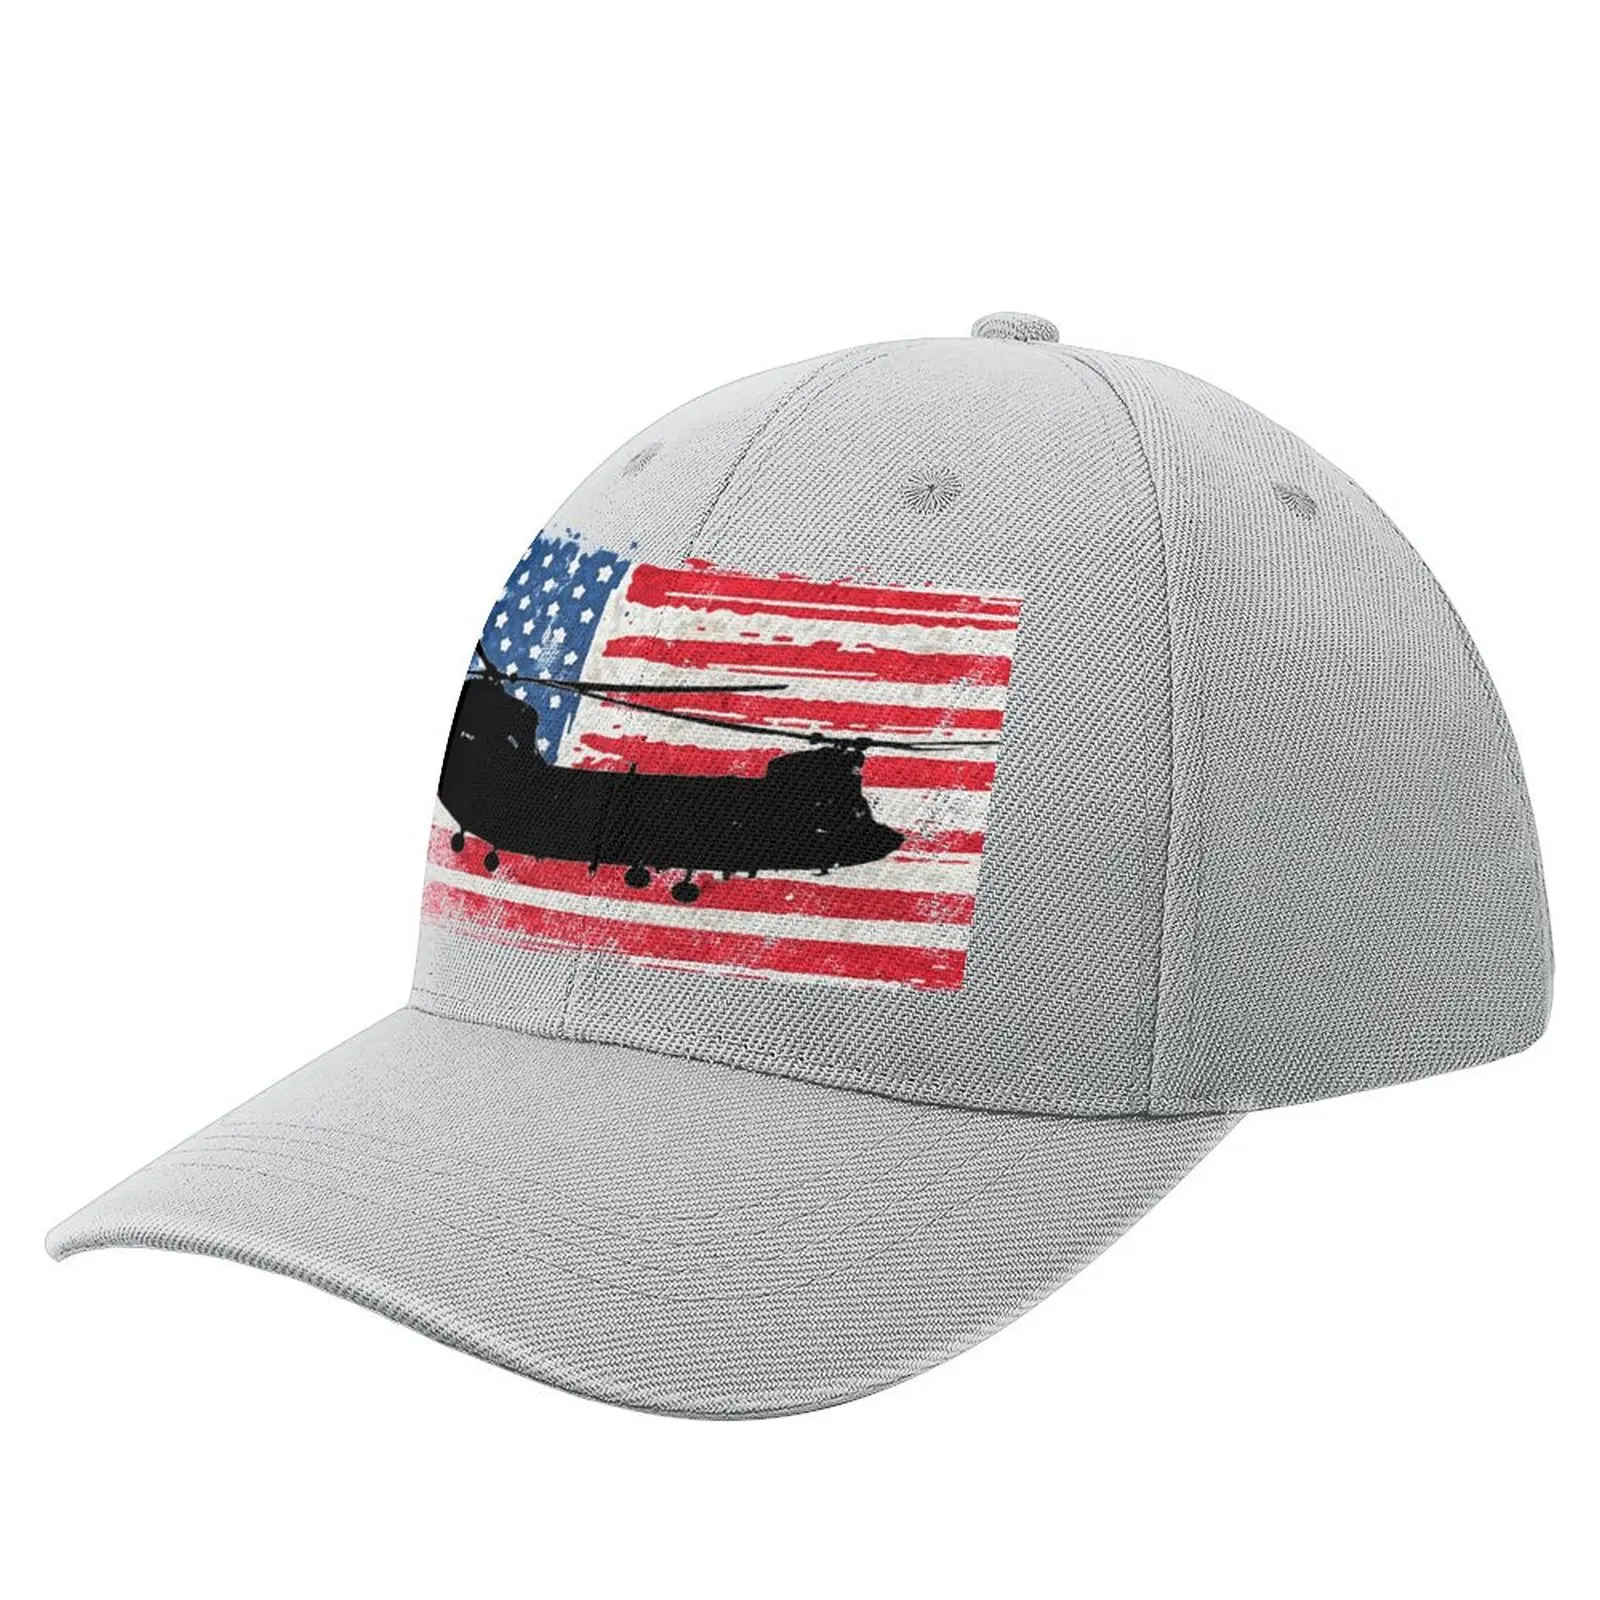 

Chinook CH-47 Helicopter US Military on Vintage Flag Baseball Cap Male hiking hat Hat Ladies Men'S